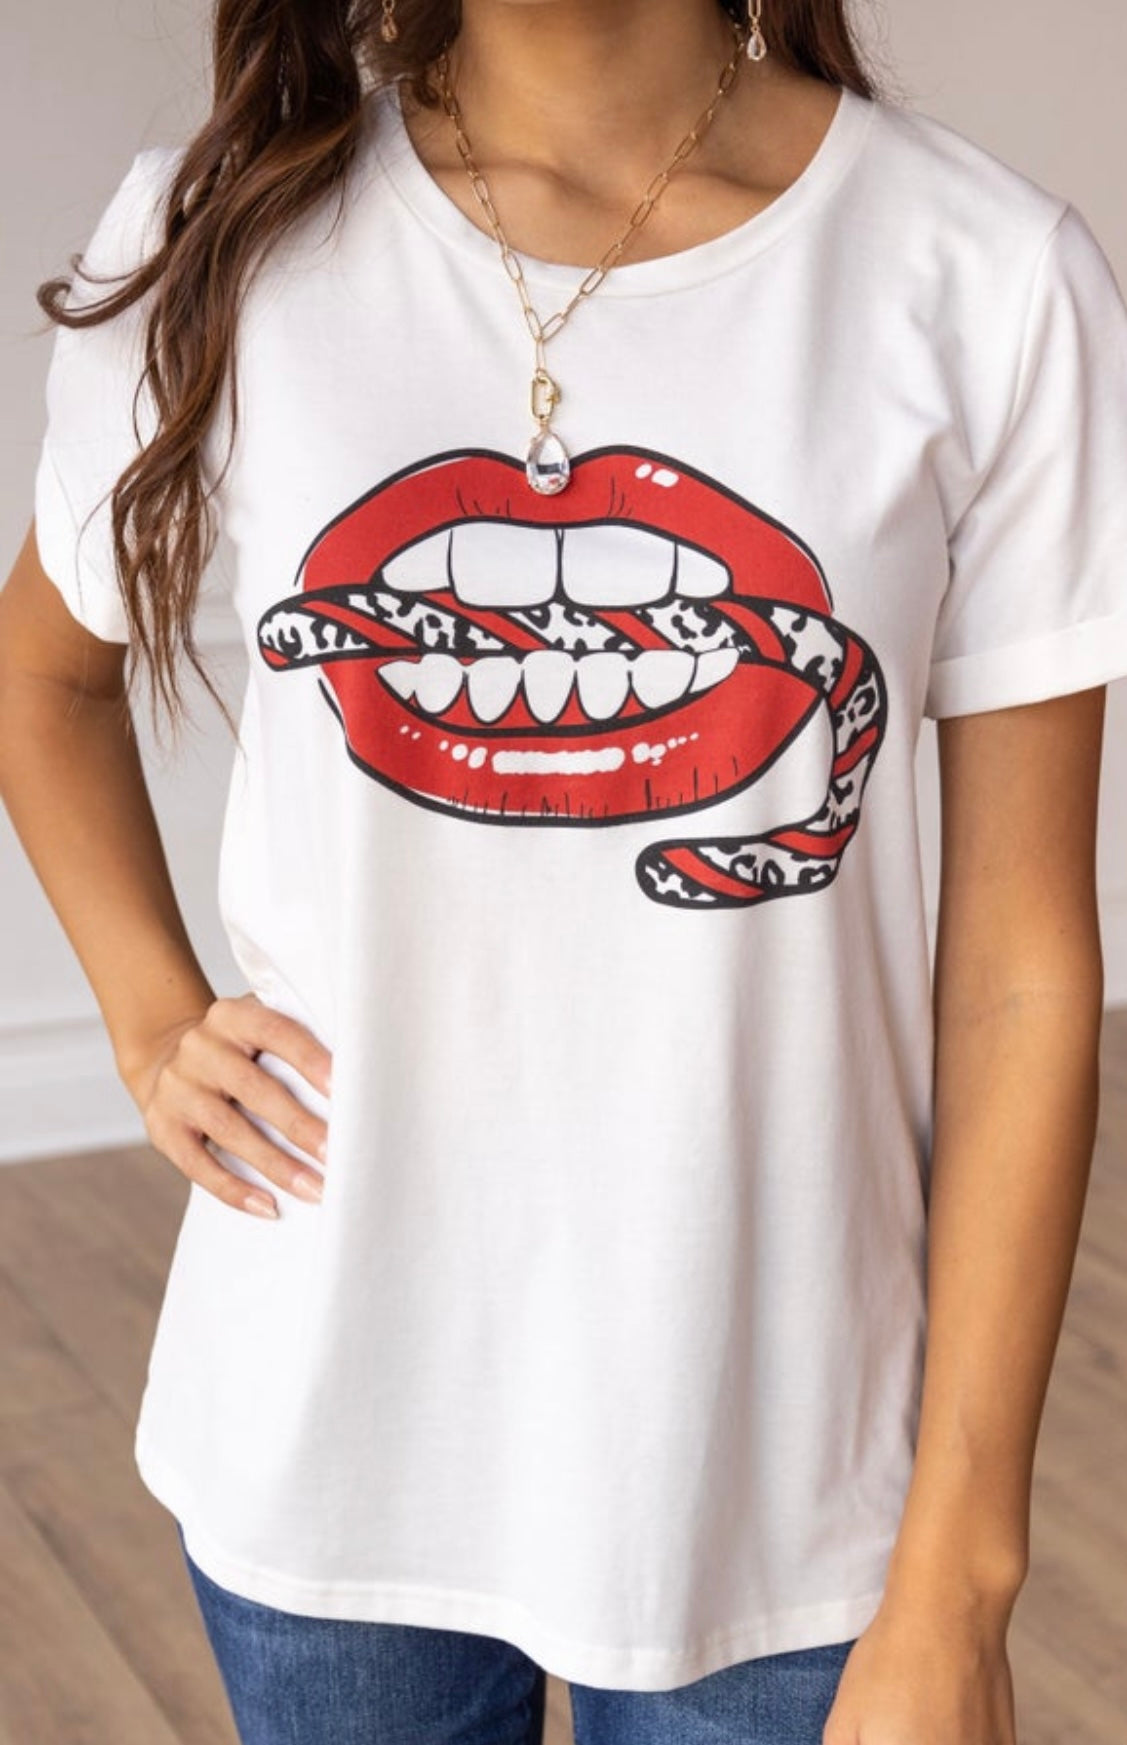 Red Lip Candy Cane Graphic Tee